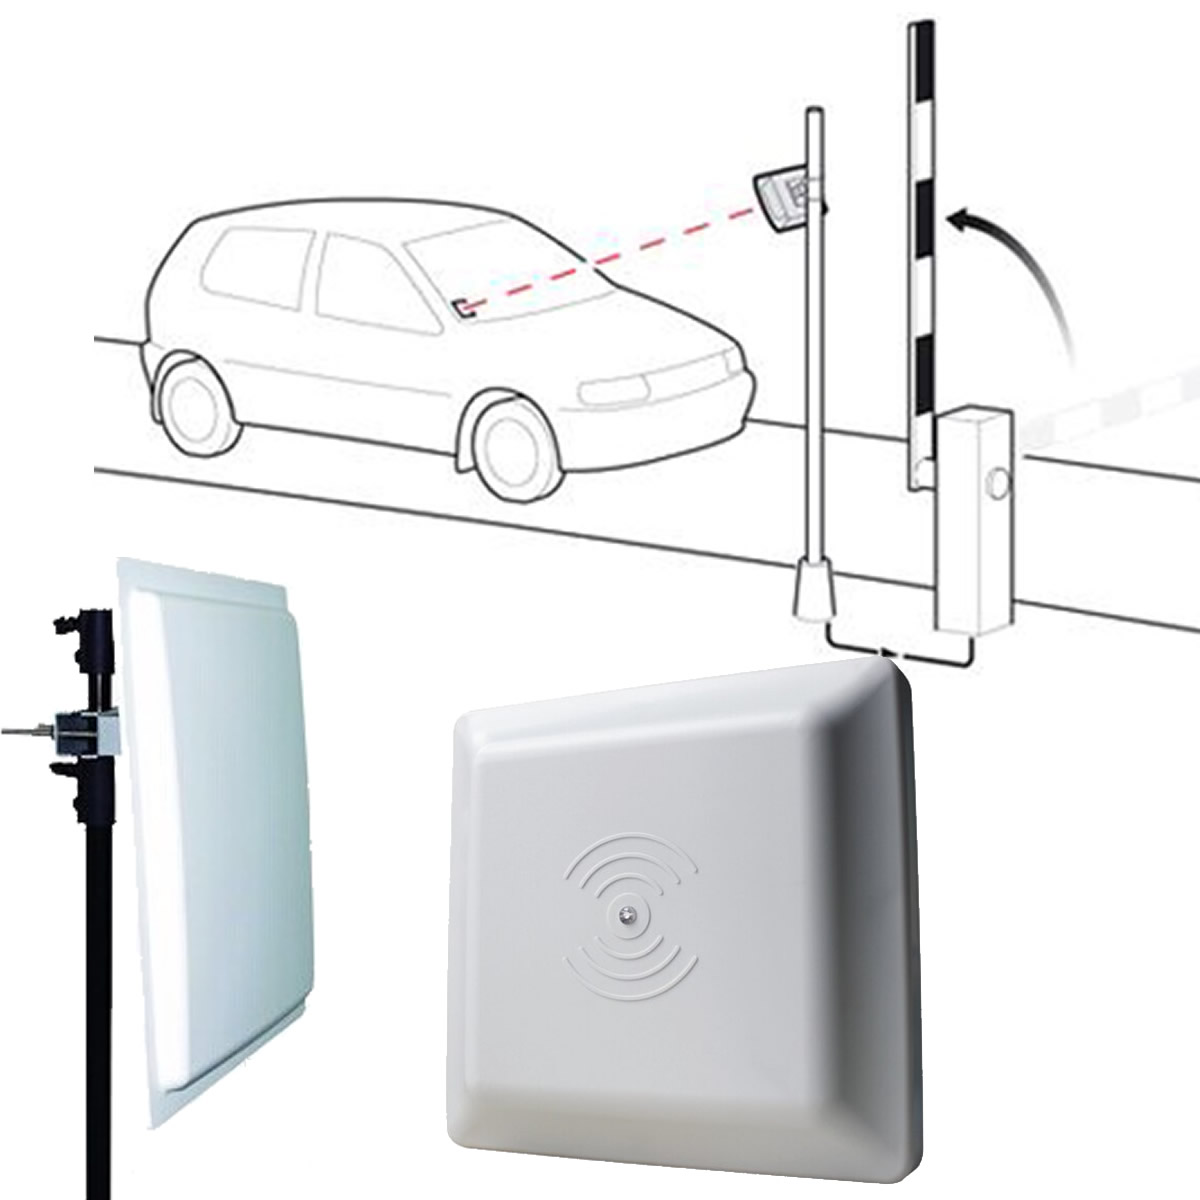 Lector Uhf 6mts Rfid 8db Vehicular Acceso Smart Software